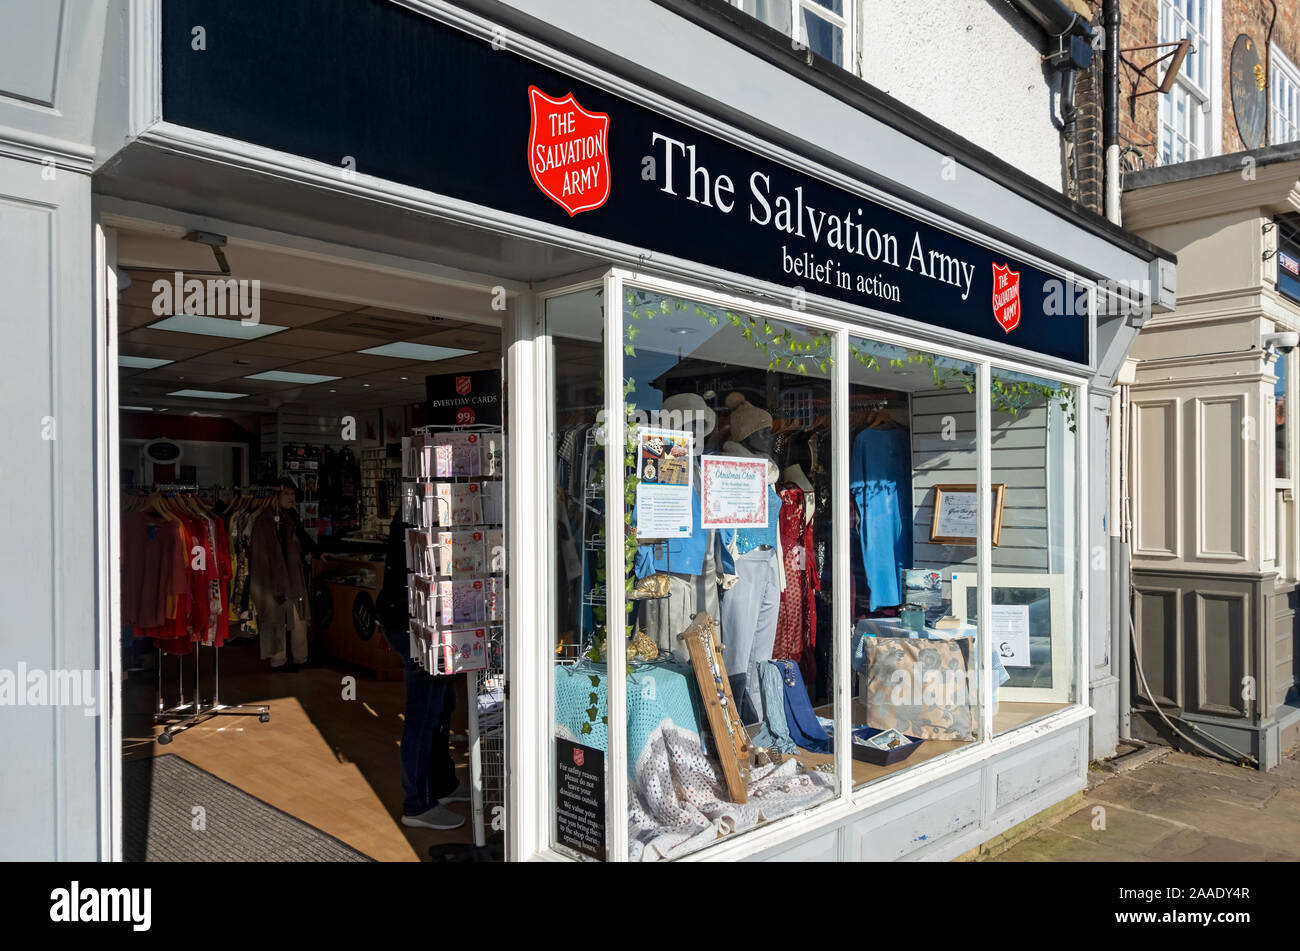 Salvation Army charity clothes shop store on the high street Thirsk England UK United Kingdom GB Great Britain Stock Photo